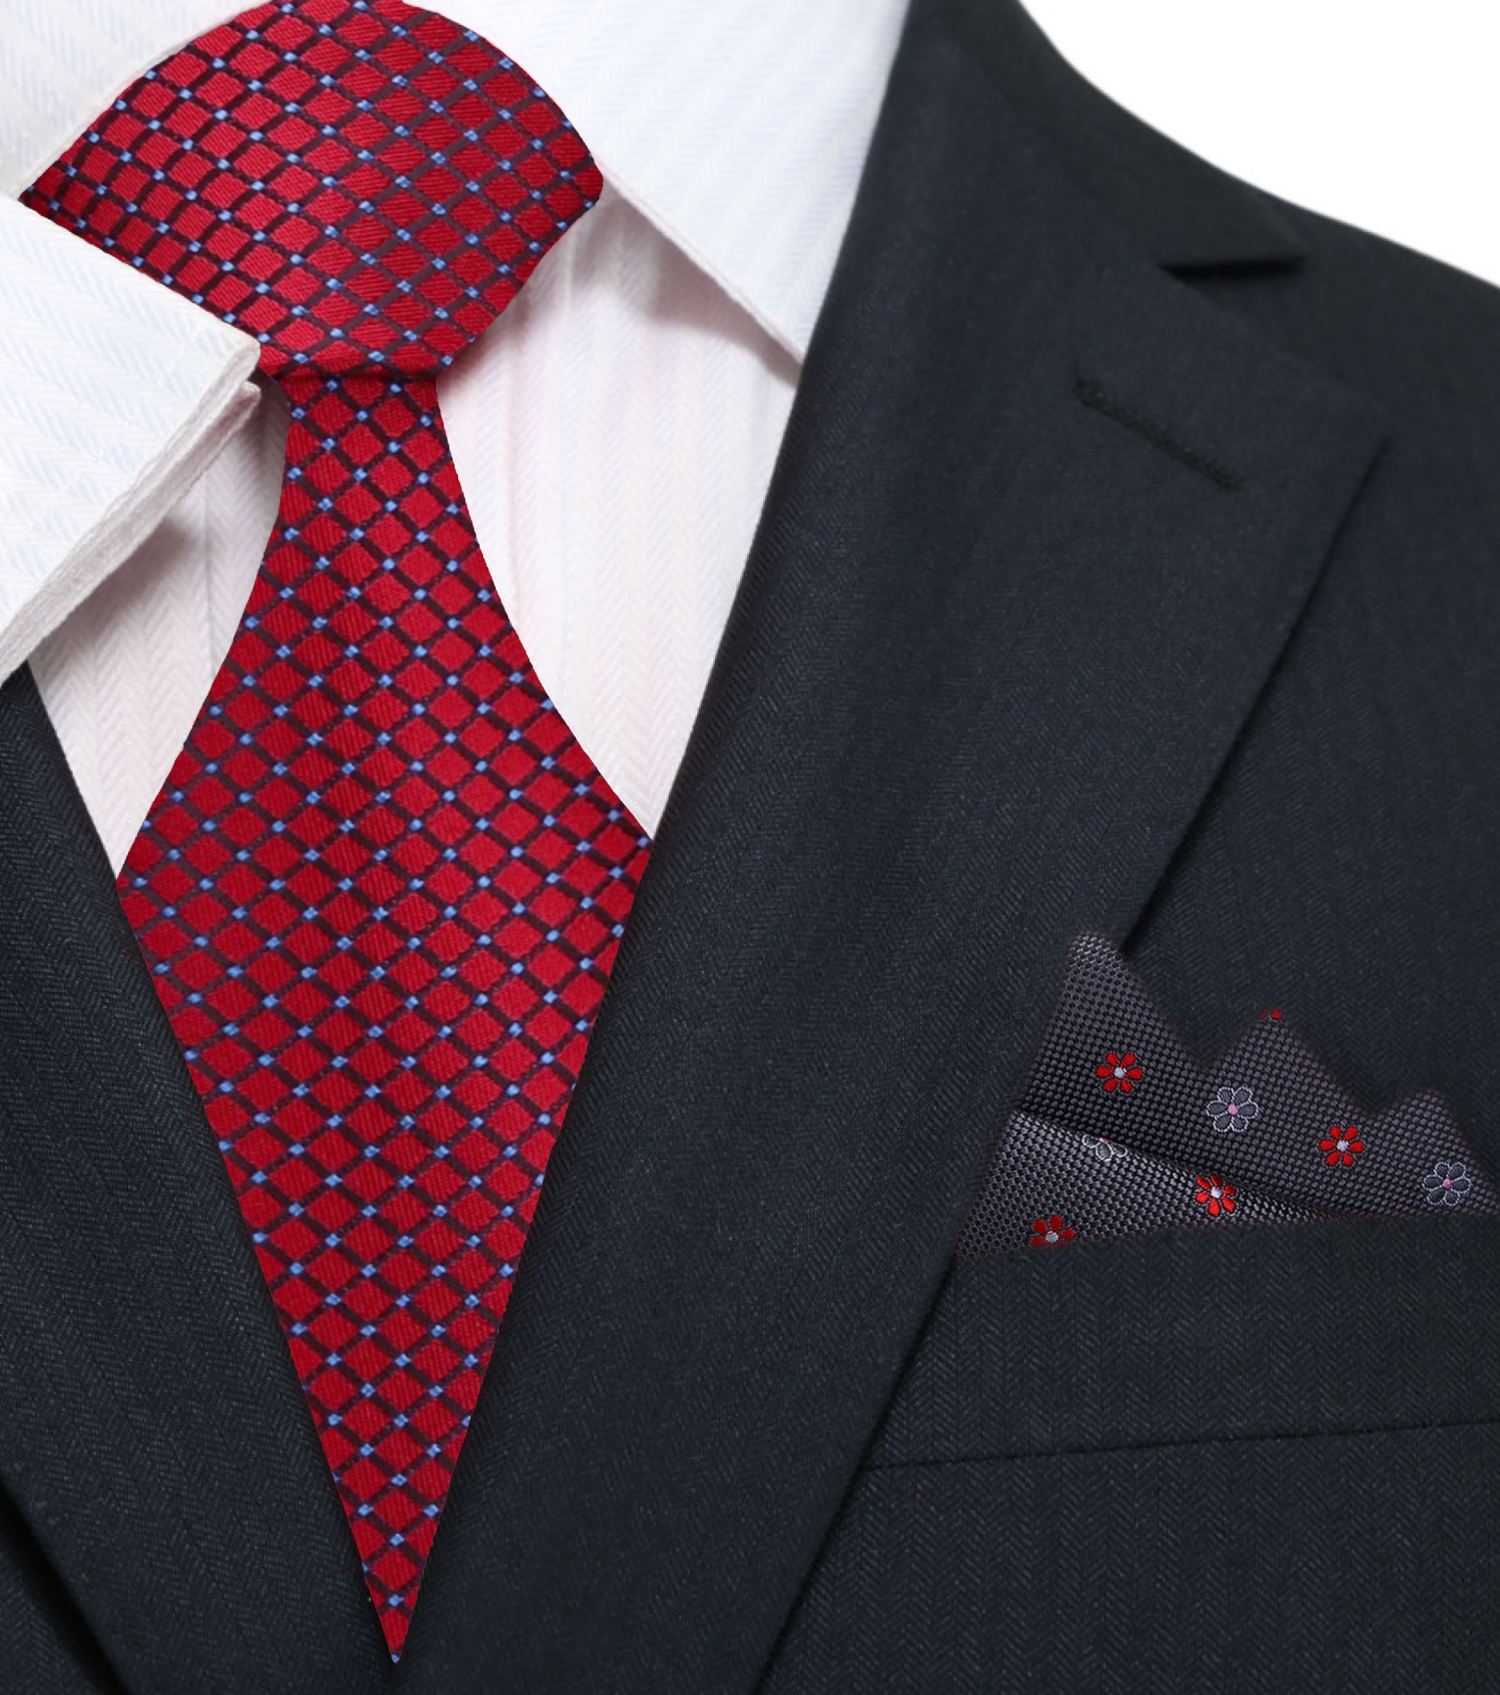 Main: A Burgundy Small Geometric Diamond With Small Dots Pattern Silk Necktie With Grey, Red Floral Pocket Square